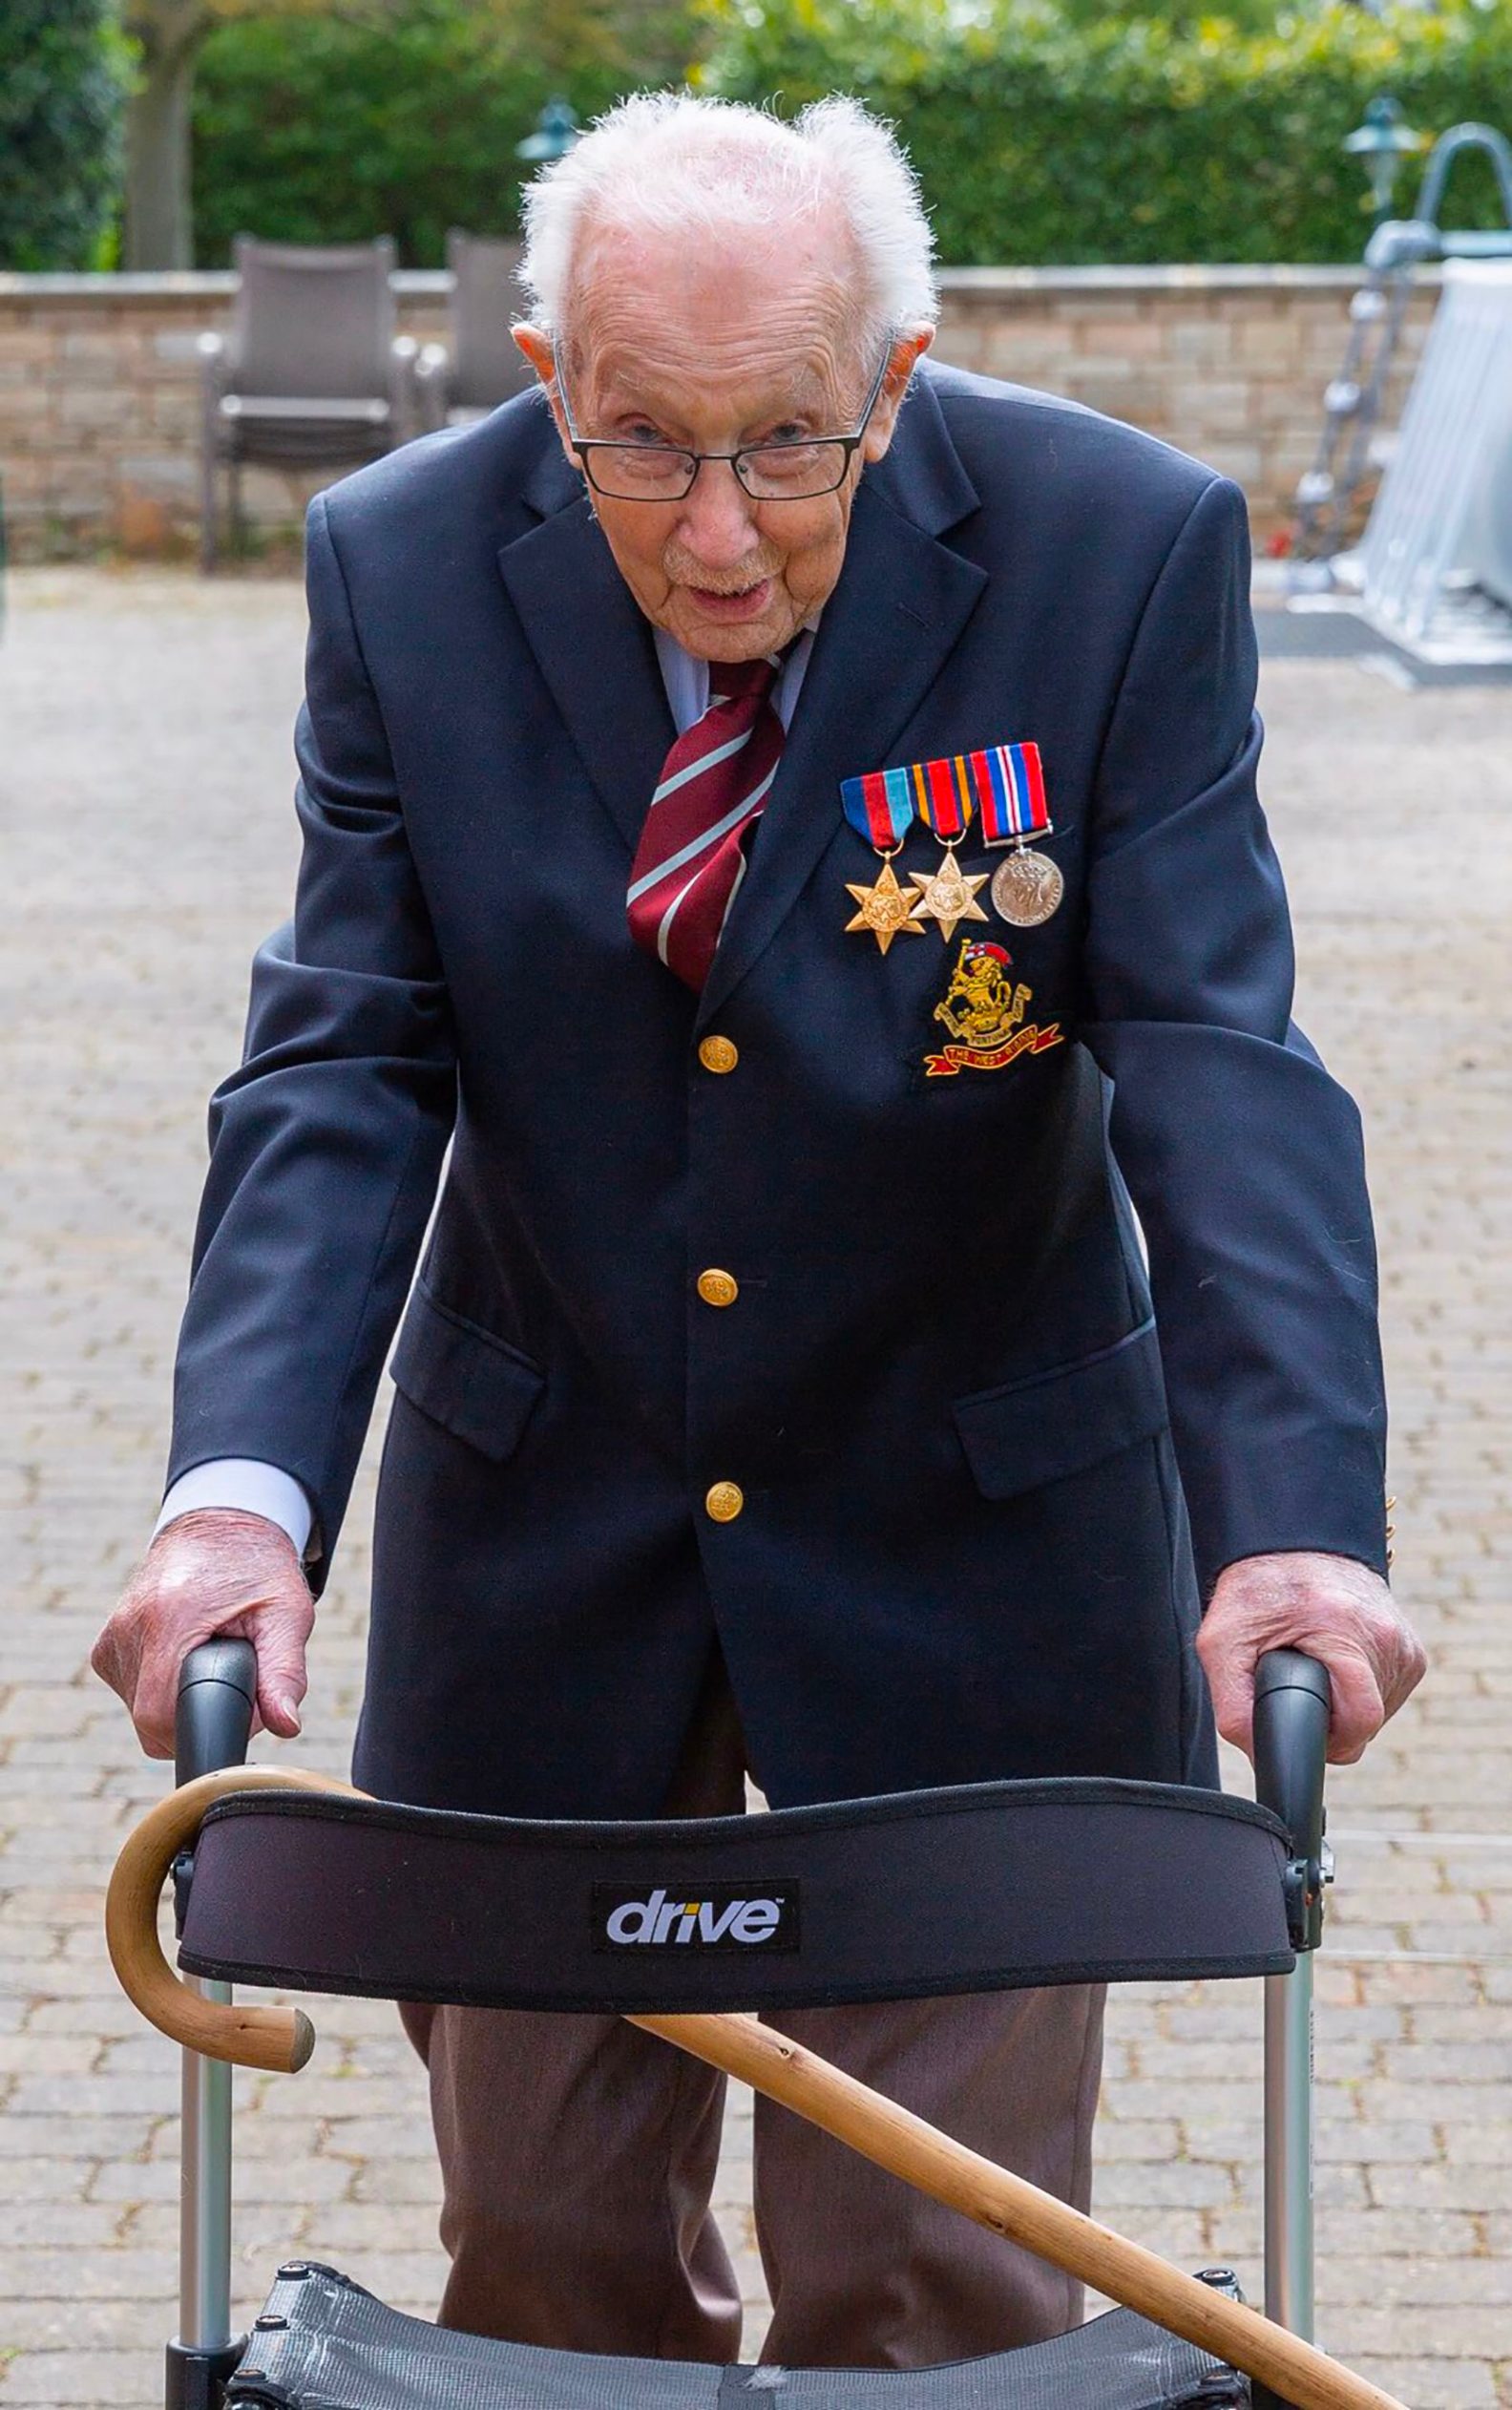 A handout photo taken in April 2020, and released by the Maytrix Group in London on April 14, 2020, shows World War Two (WWII) veteran 99-year-old Captain Tom Moore walking in his garden in Marston Moretaine, north of London, to raise money for Britain's National Health Service (NHS). - A 99-year-old British World War II veteran on Tuesday had raised over £1.5 million (.9 million) for health workers on the coronavirus front-line, crashing the donation website hosting his appeal. Tom Moore, a captain who served in India, is being sponsored to complete 100 lengths of his 25-metre garden, with the aid of a frame, in time for his 100th birthday at the end of the month. He originally planned to raise £1,000 for a National Health Service charity after receiving treatment for a broken hip and cancer. But he has now smashed the million mark and completed 70 laps of his garden in Bedfordshire, south England. (Photo by - / MAYTRIX GROUP / AFP) / RESTRICTED TO EDITORIAL USE - MANDATORY CREDIT 